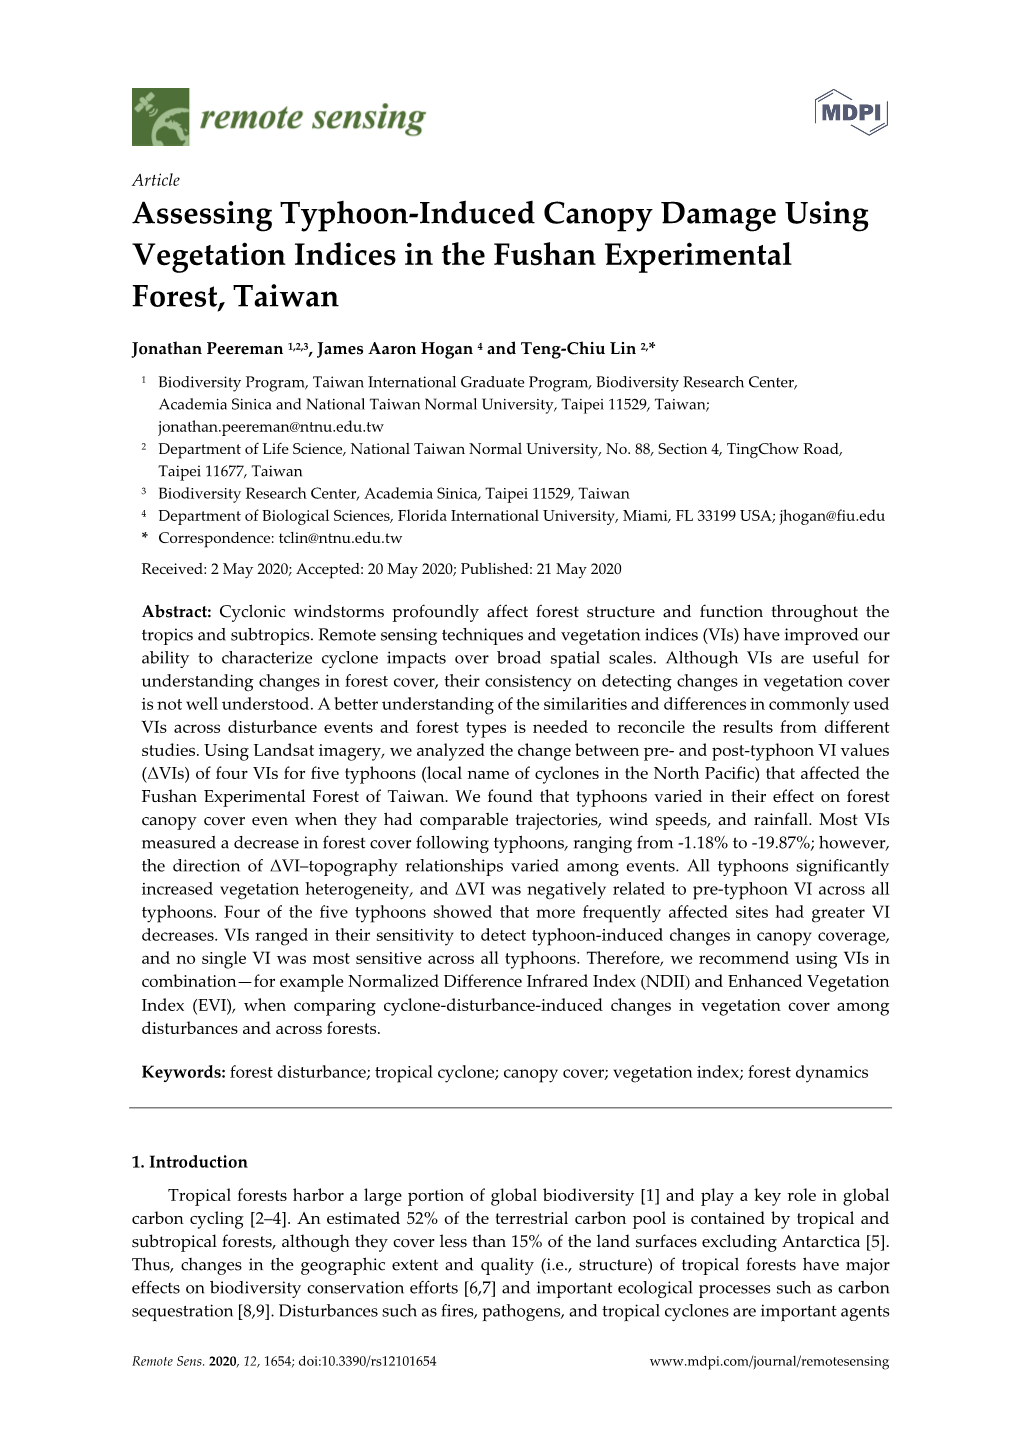 Assessing Typhoon-Induced Canopy Damage Using Vegetation Indices in the Fushan Experimental Forest, Taiwan